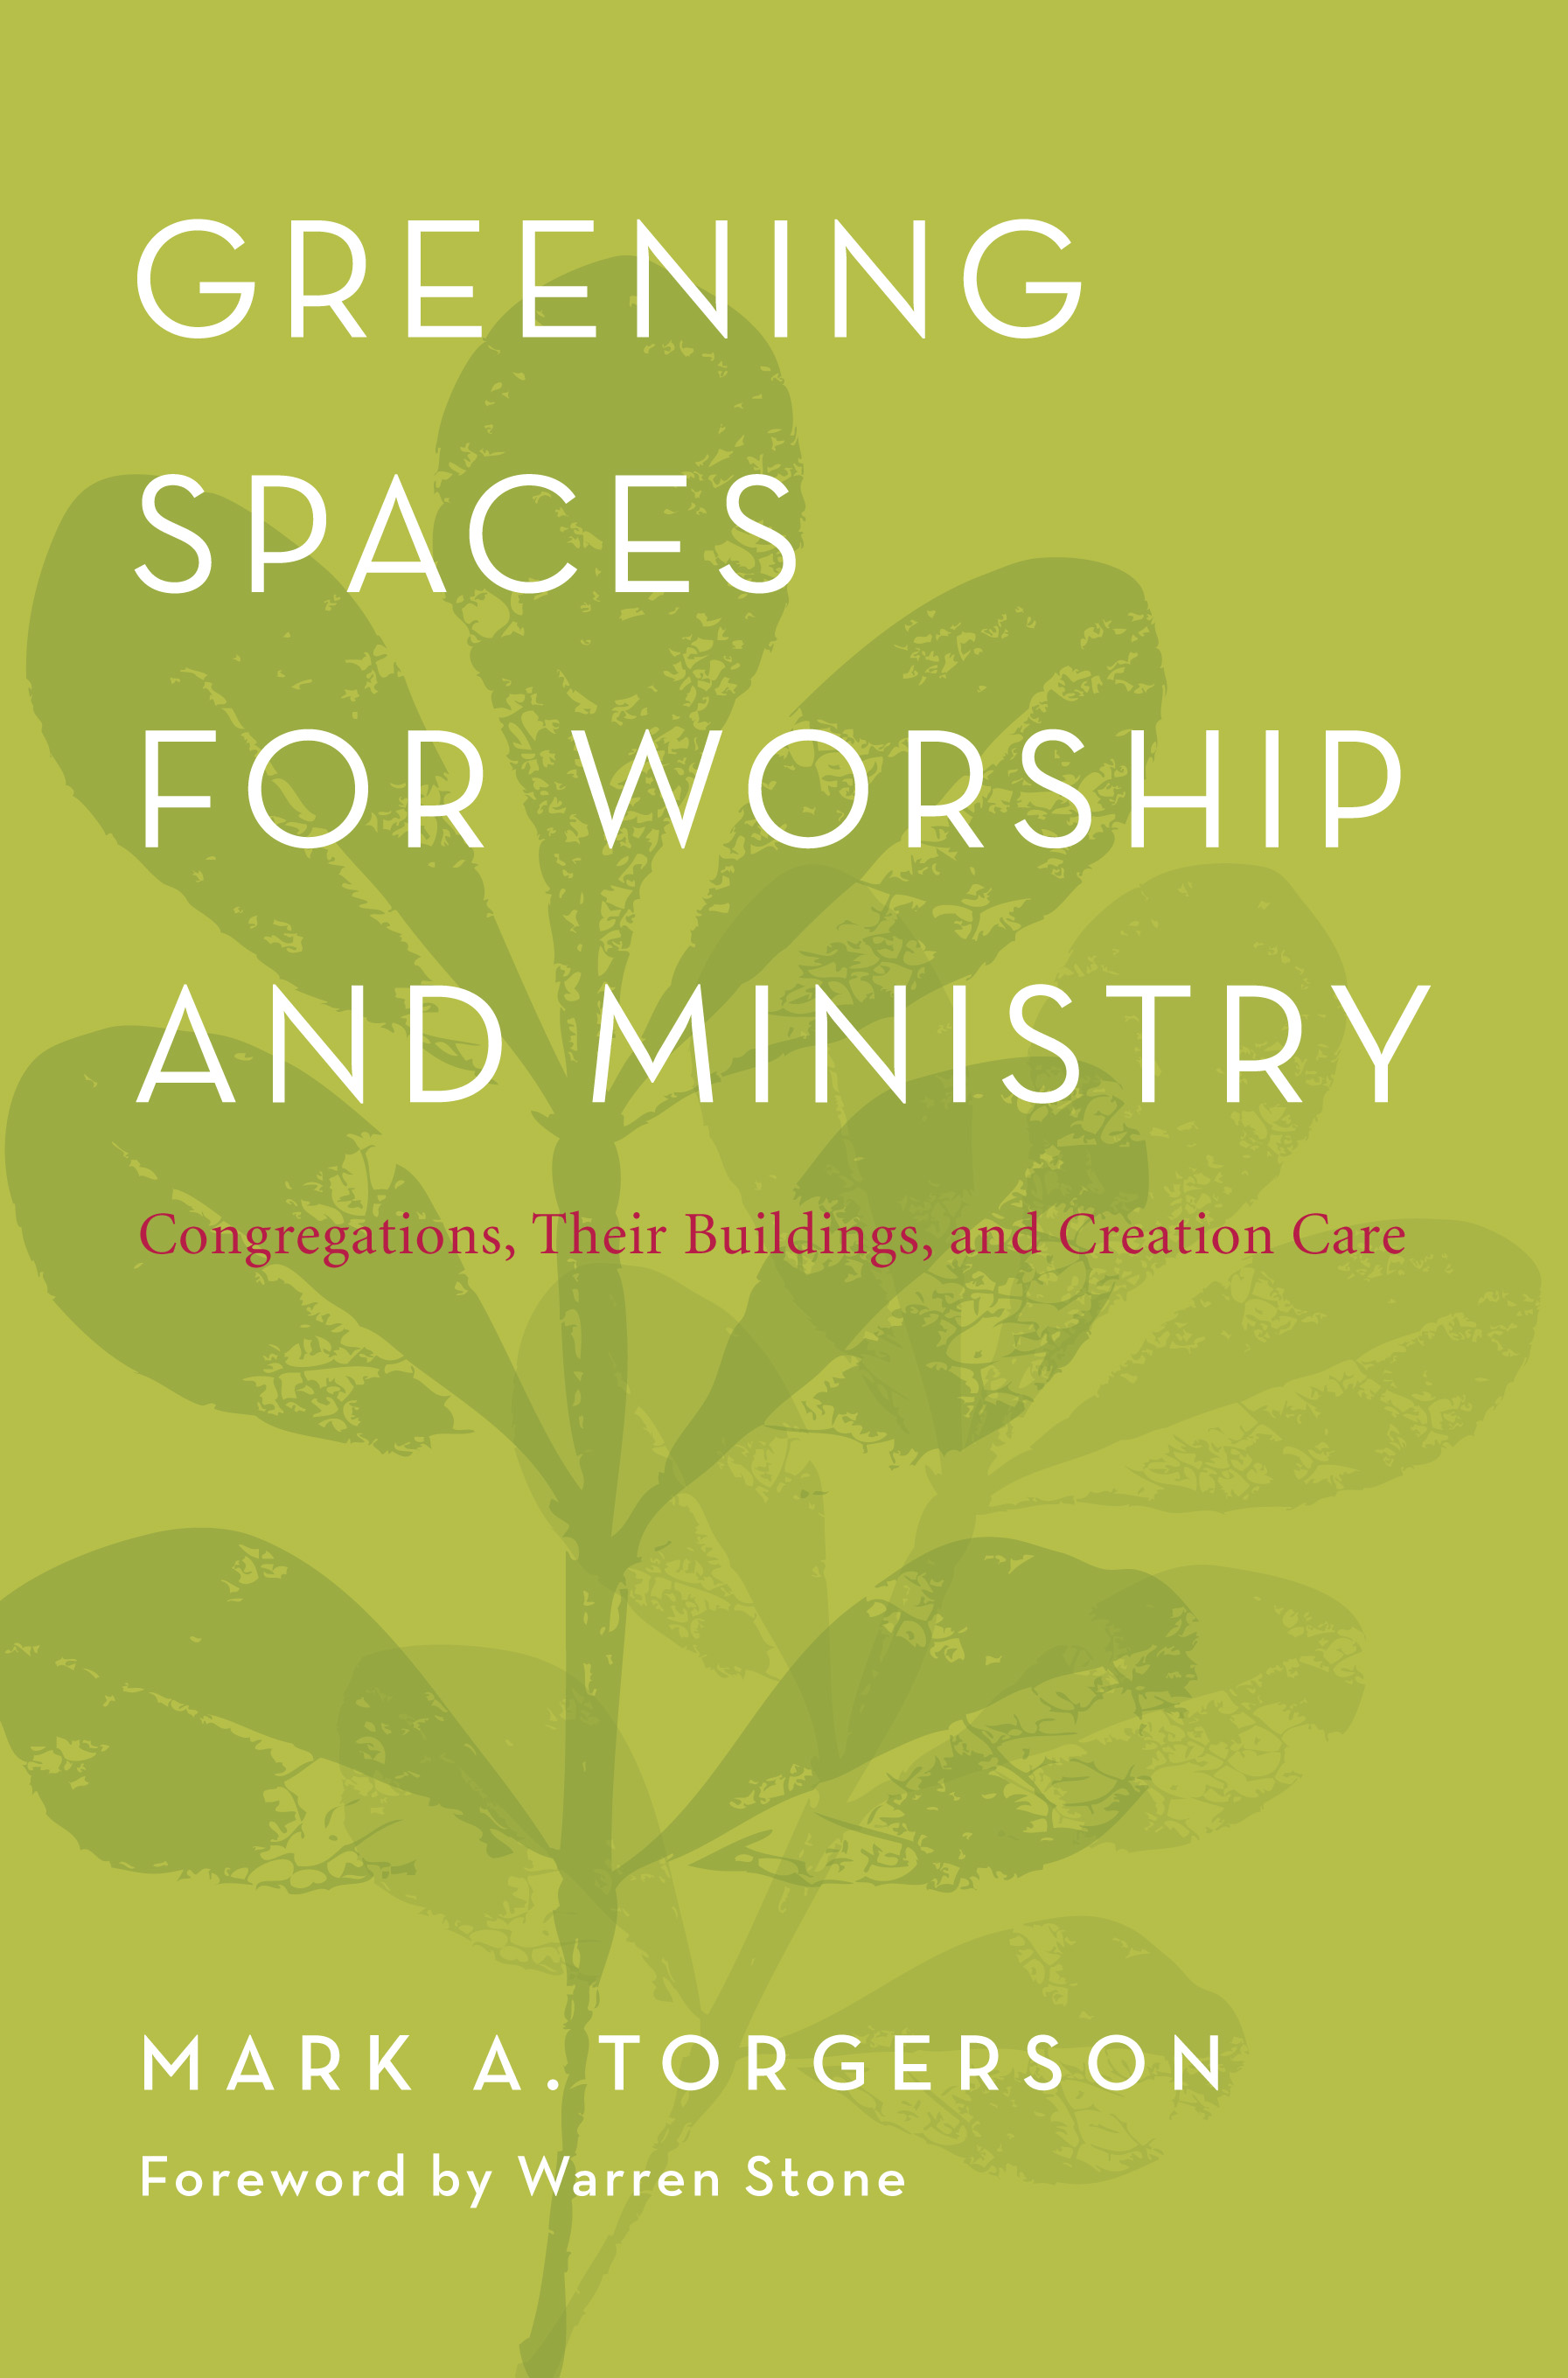 Greening Spaces for Worship and Ministry: Congregations, Their Buildings, and Creation Care